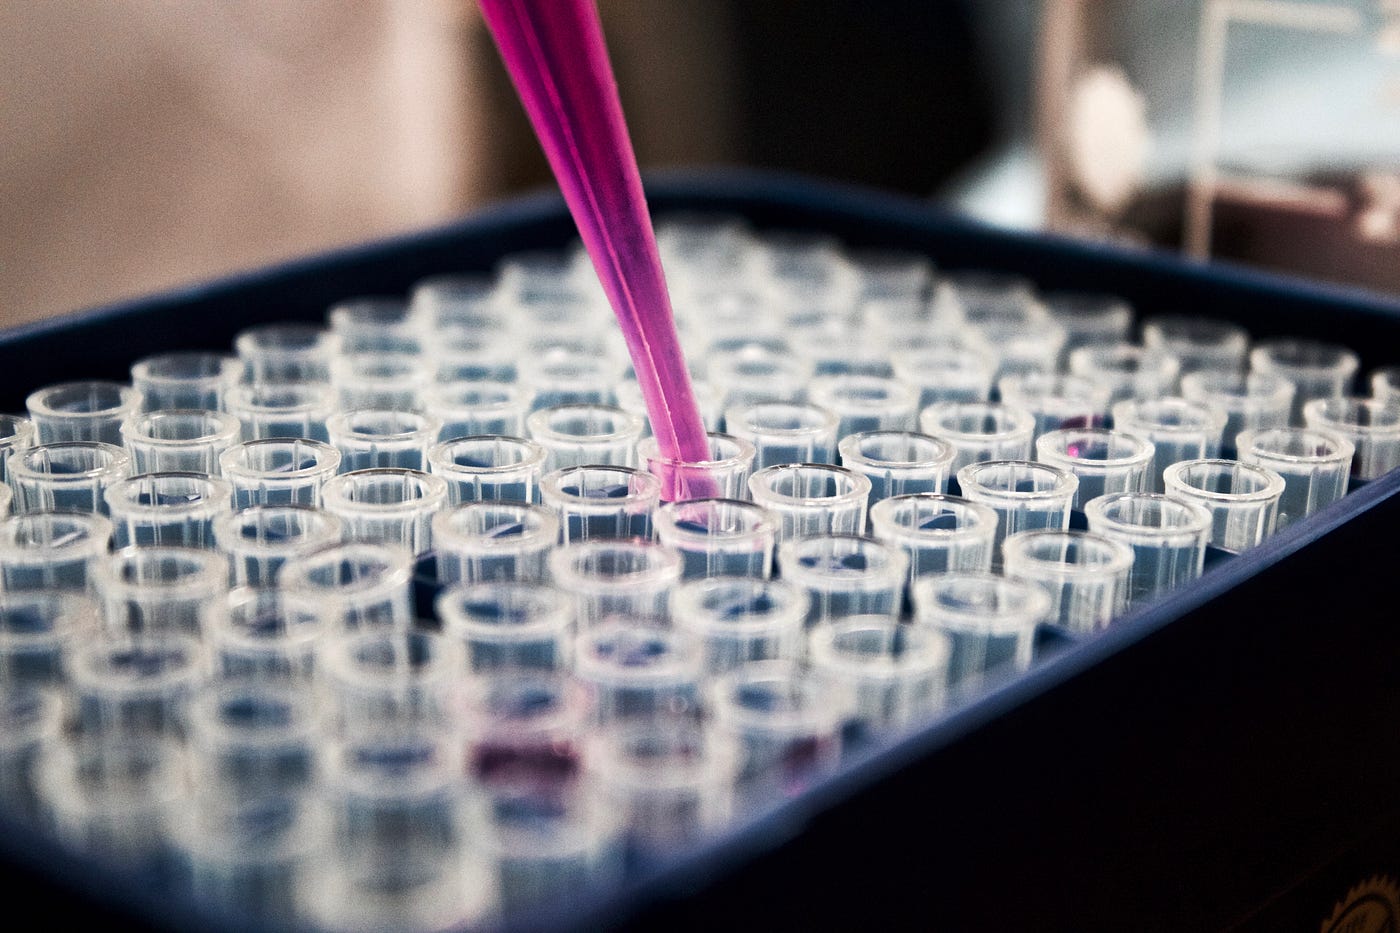 A pipette dispenses a pink fluid into a rectangular container of about 75 test tubes.